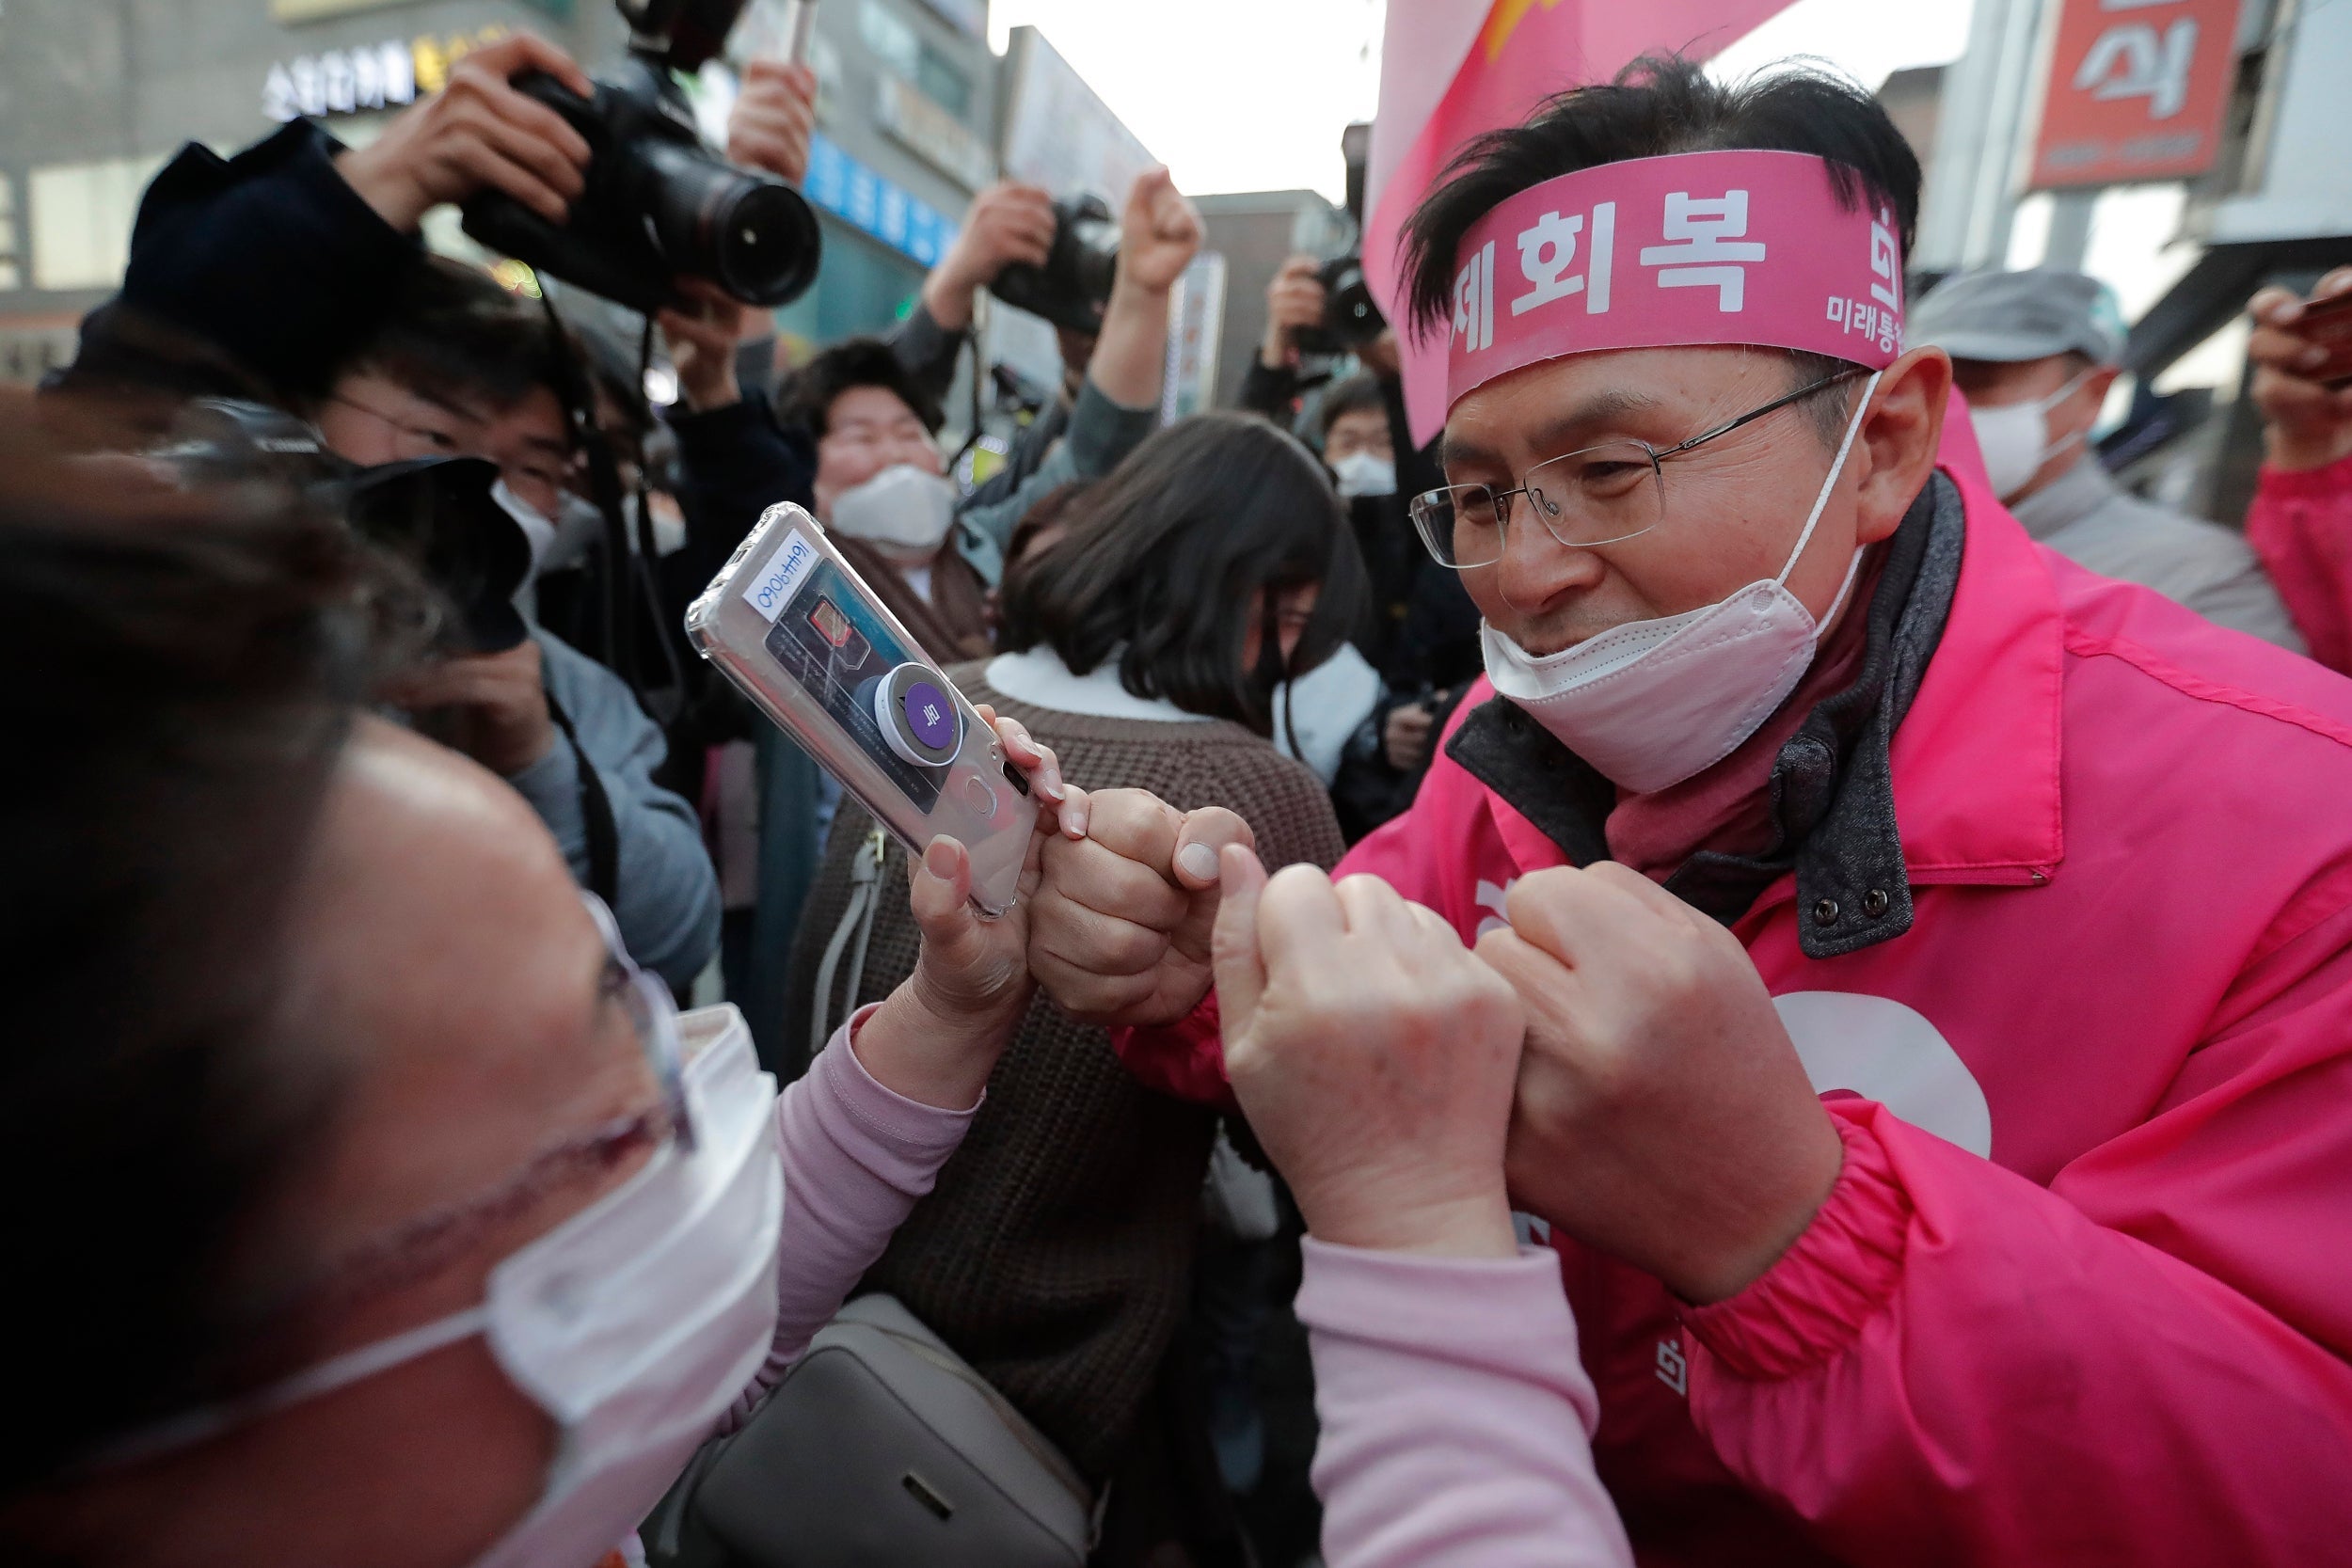 The main opposition United Future Party's candidate Hwang Kyo-ahn, right, is greeted by a supporter during campaigning on Tuesday